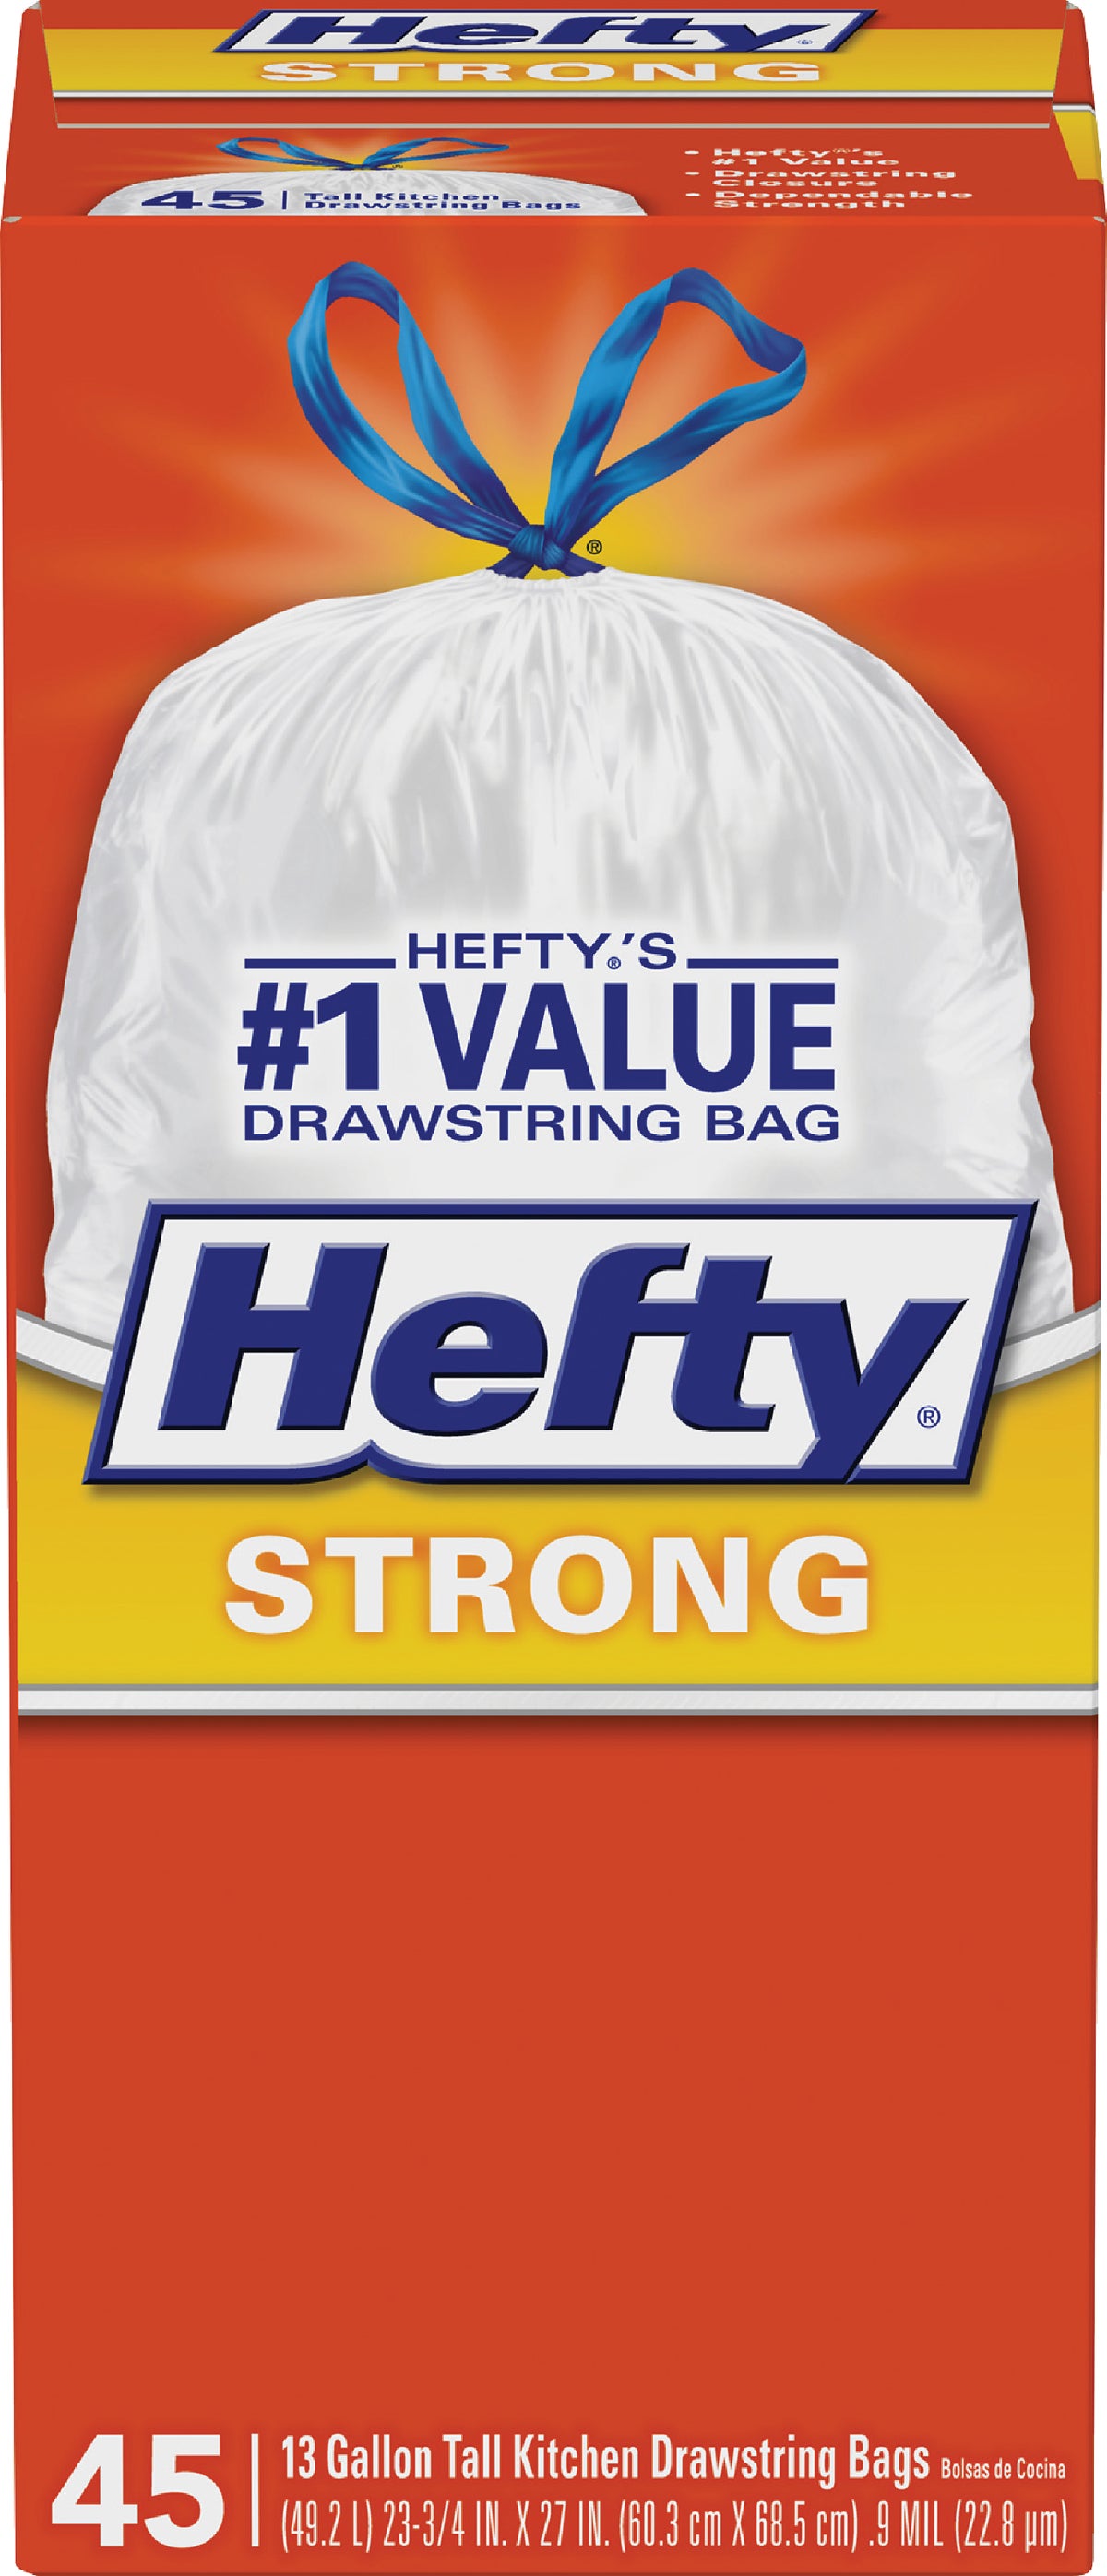 Hefty EasyFlaps Bags, Flap-Tie, Tall Kitchen, 13 Gallon - 80 bags